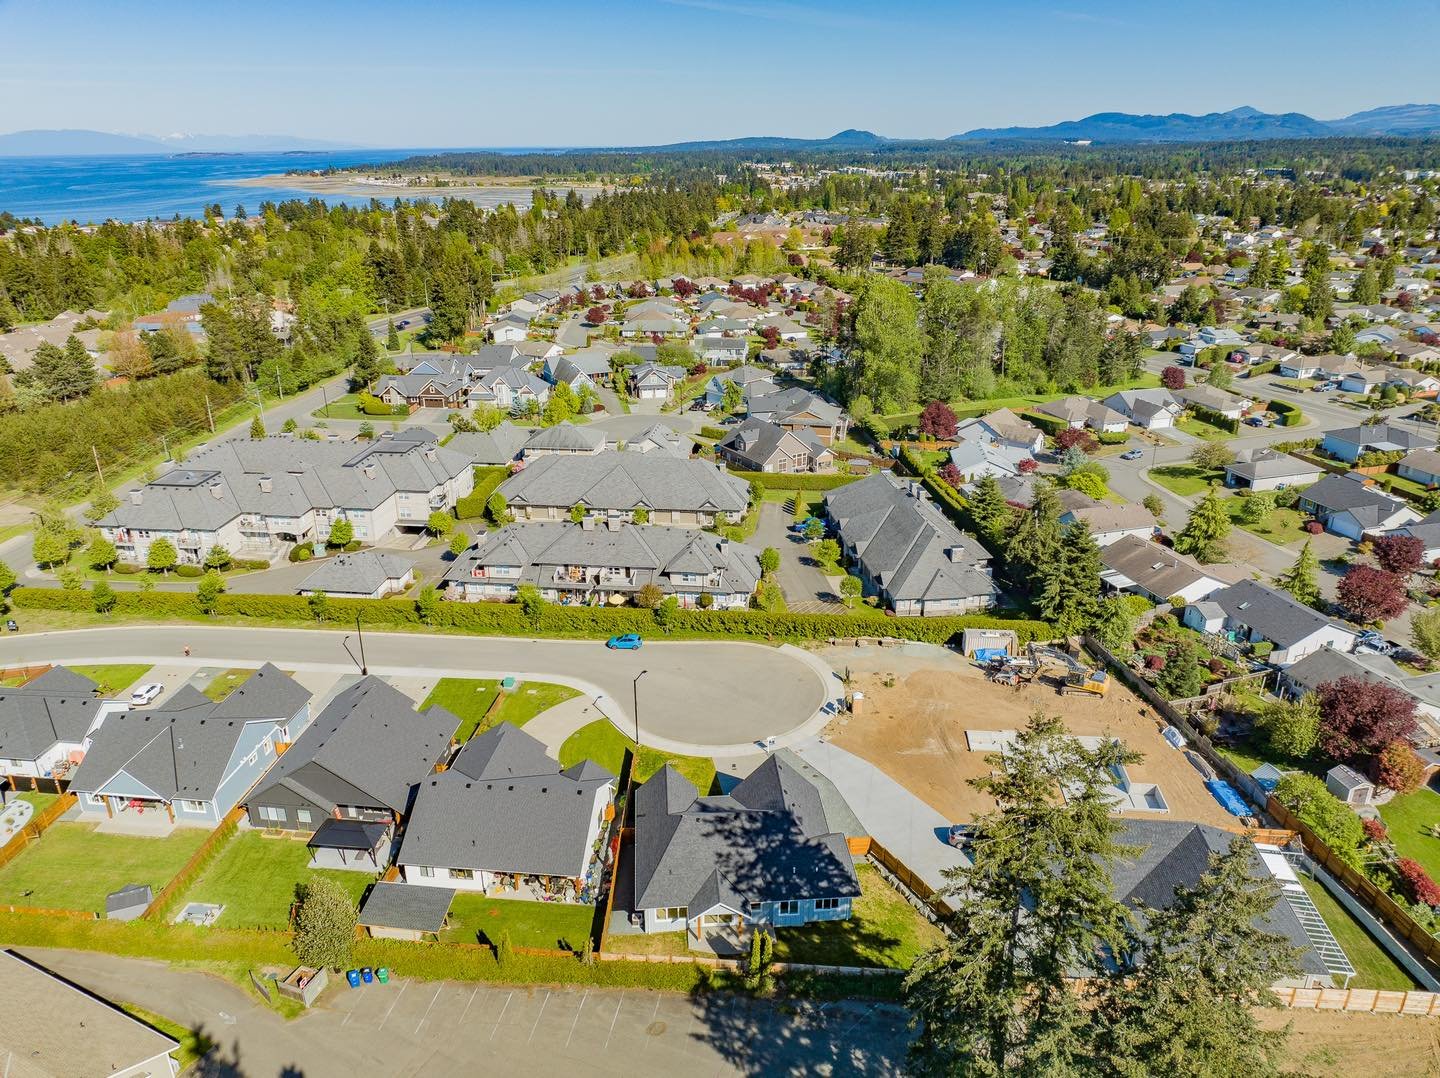 Armando Conejos Personal Real Estate Corporation just sent over these fresh drone shots of our Sun West Place development.

These homes have been so great to build for our crews for a few reasons.

First, the proximity to the beach and wilderness are